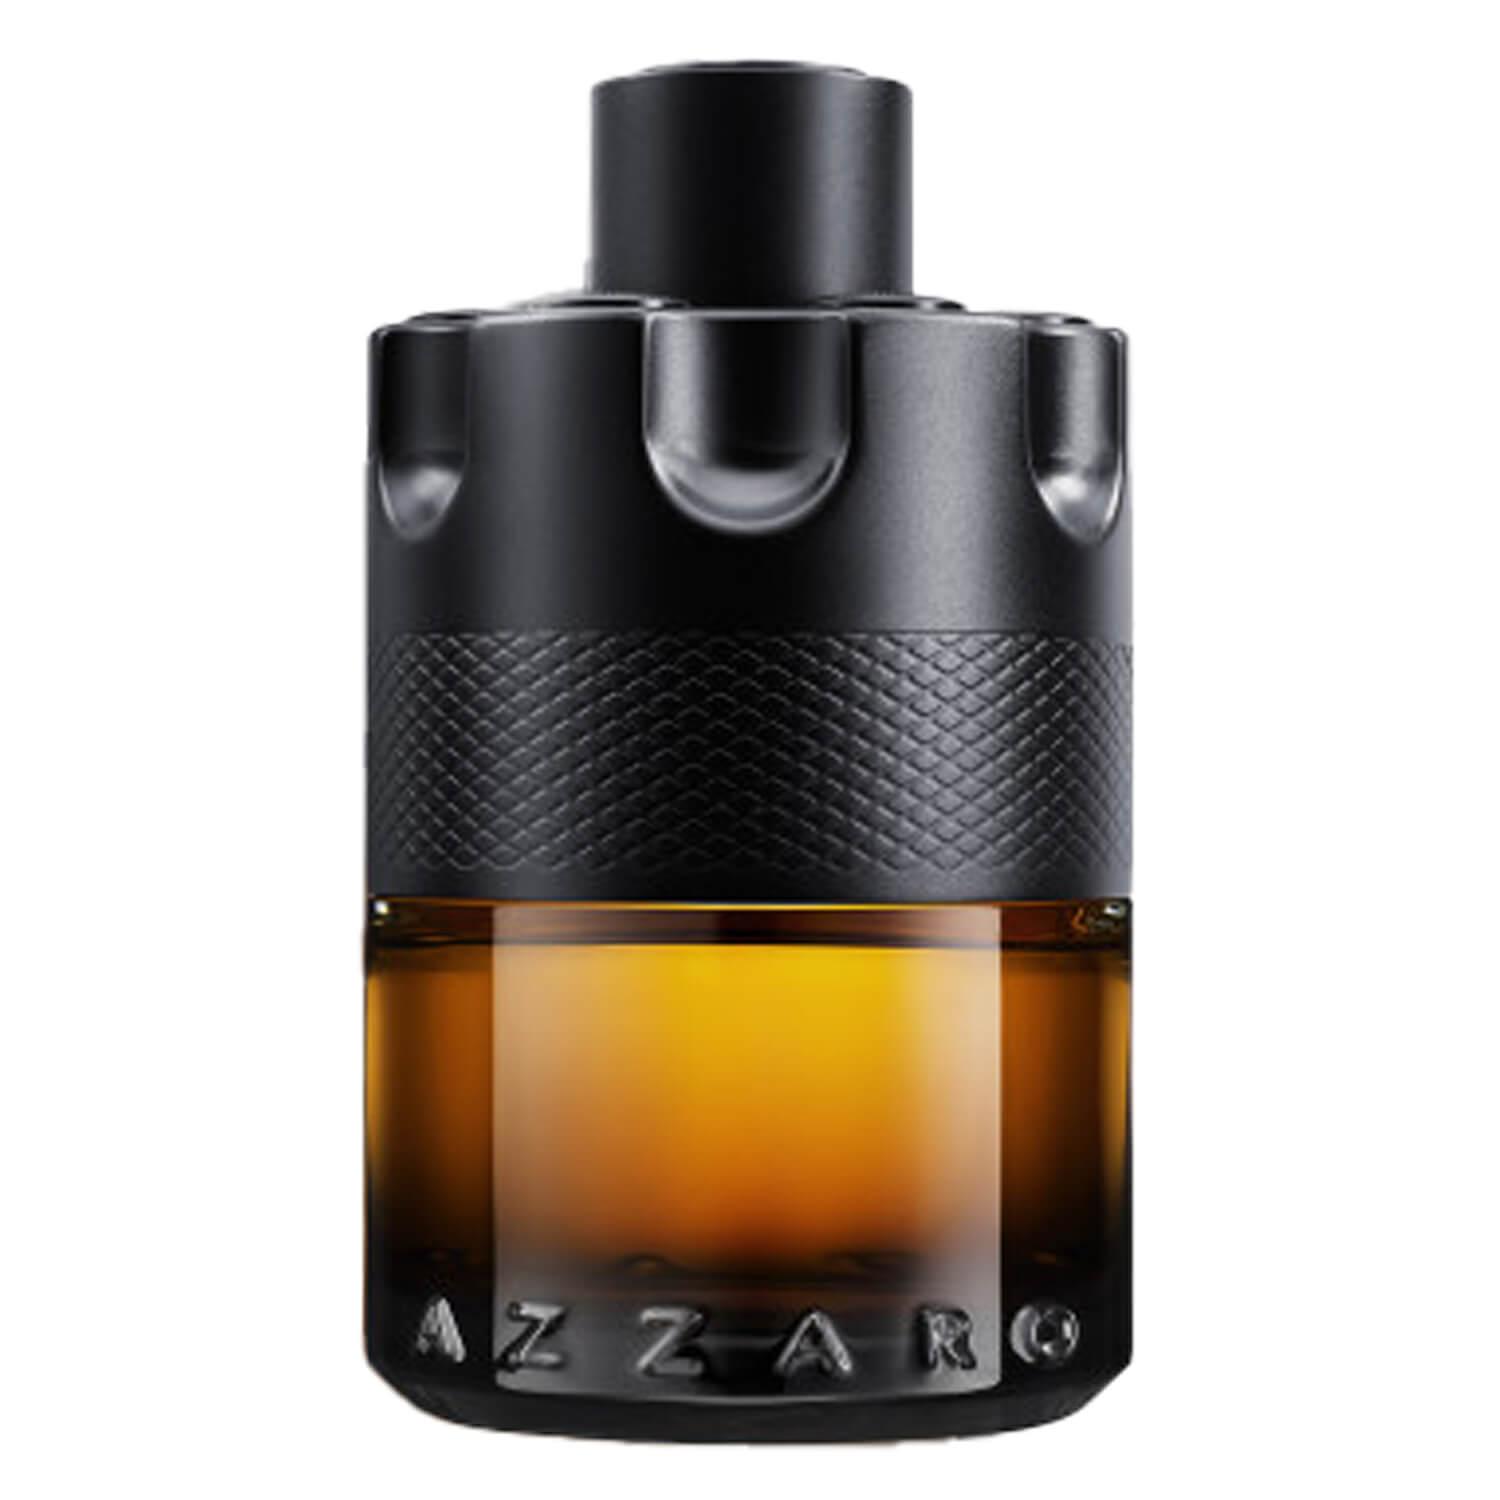 Azzaro Wanted - The Most Wanted Le Parfum